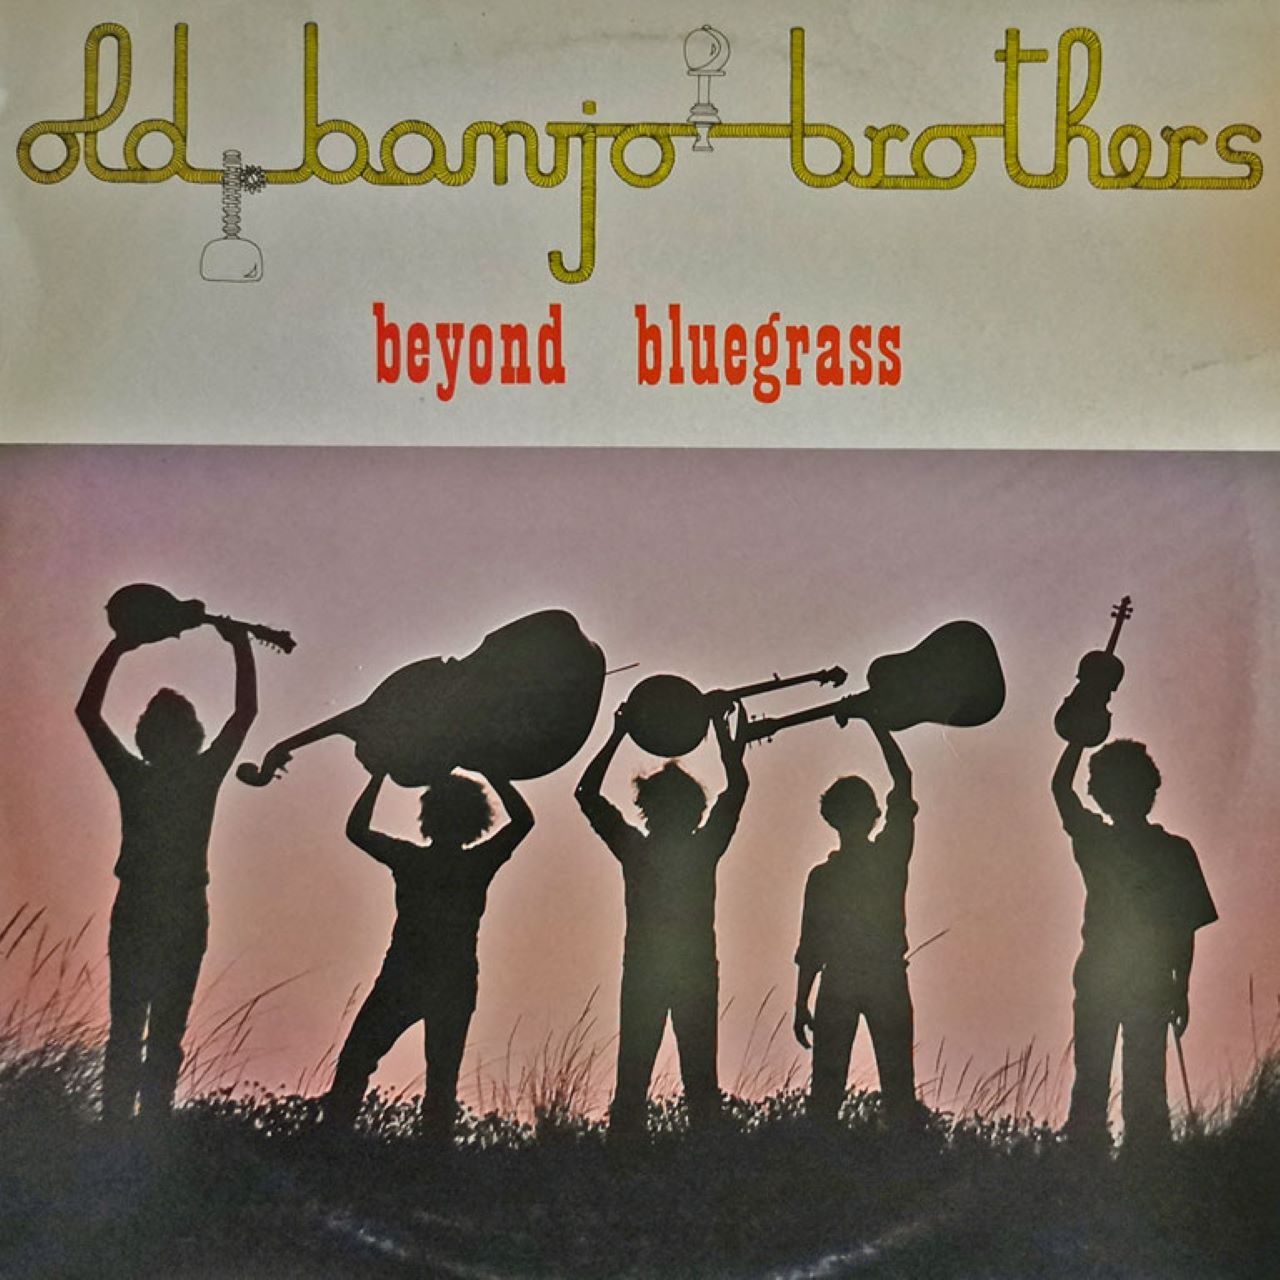 Old Banjo Brothers – Beyond Bluegrass cover album